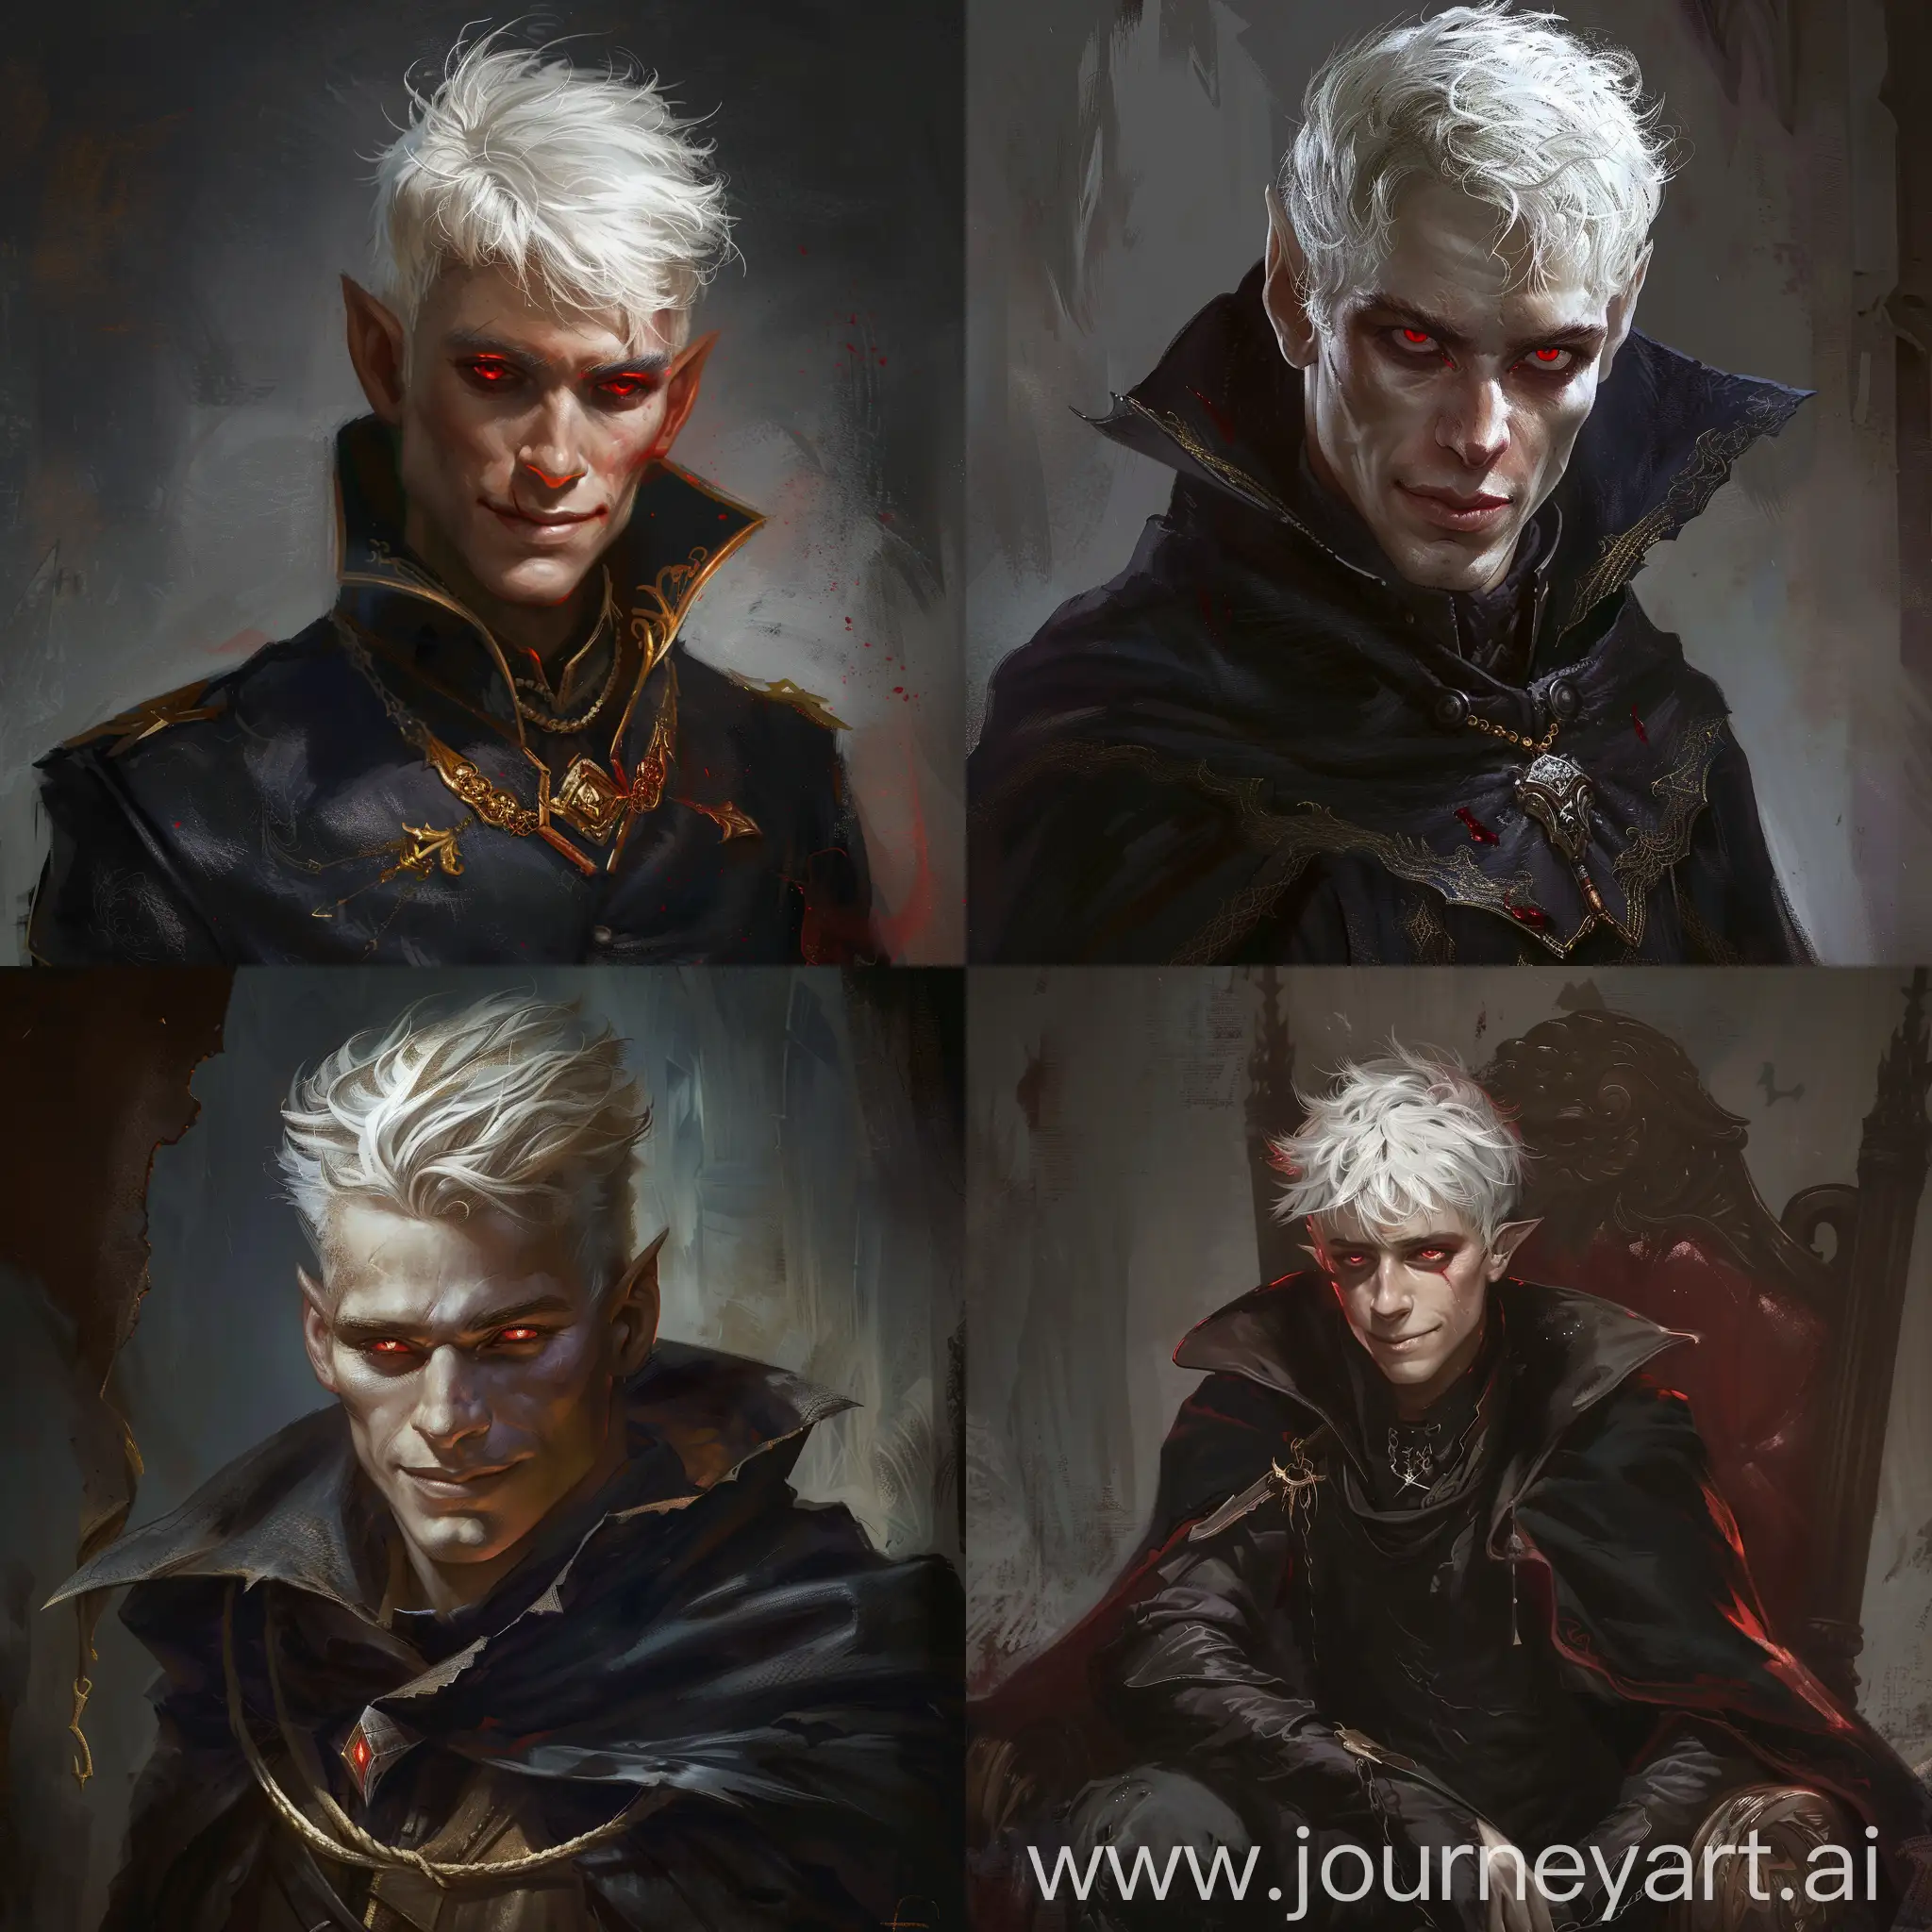 Fantasy-Mage-with-Short-White-Hair-and-Red-Eyes-Smiling